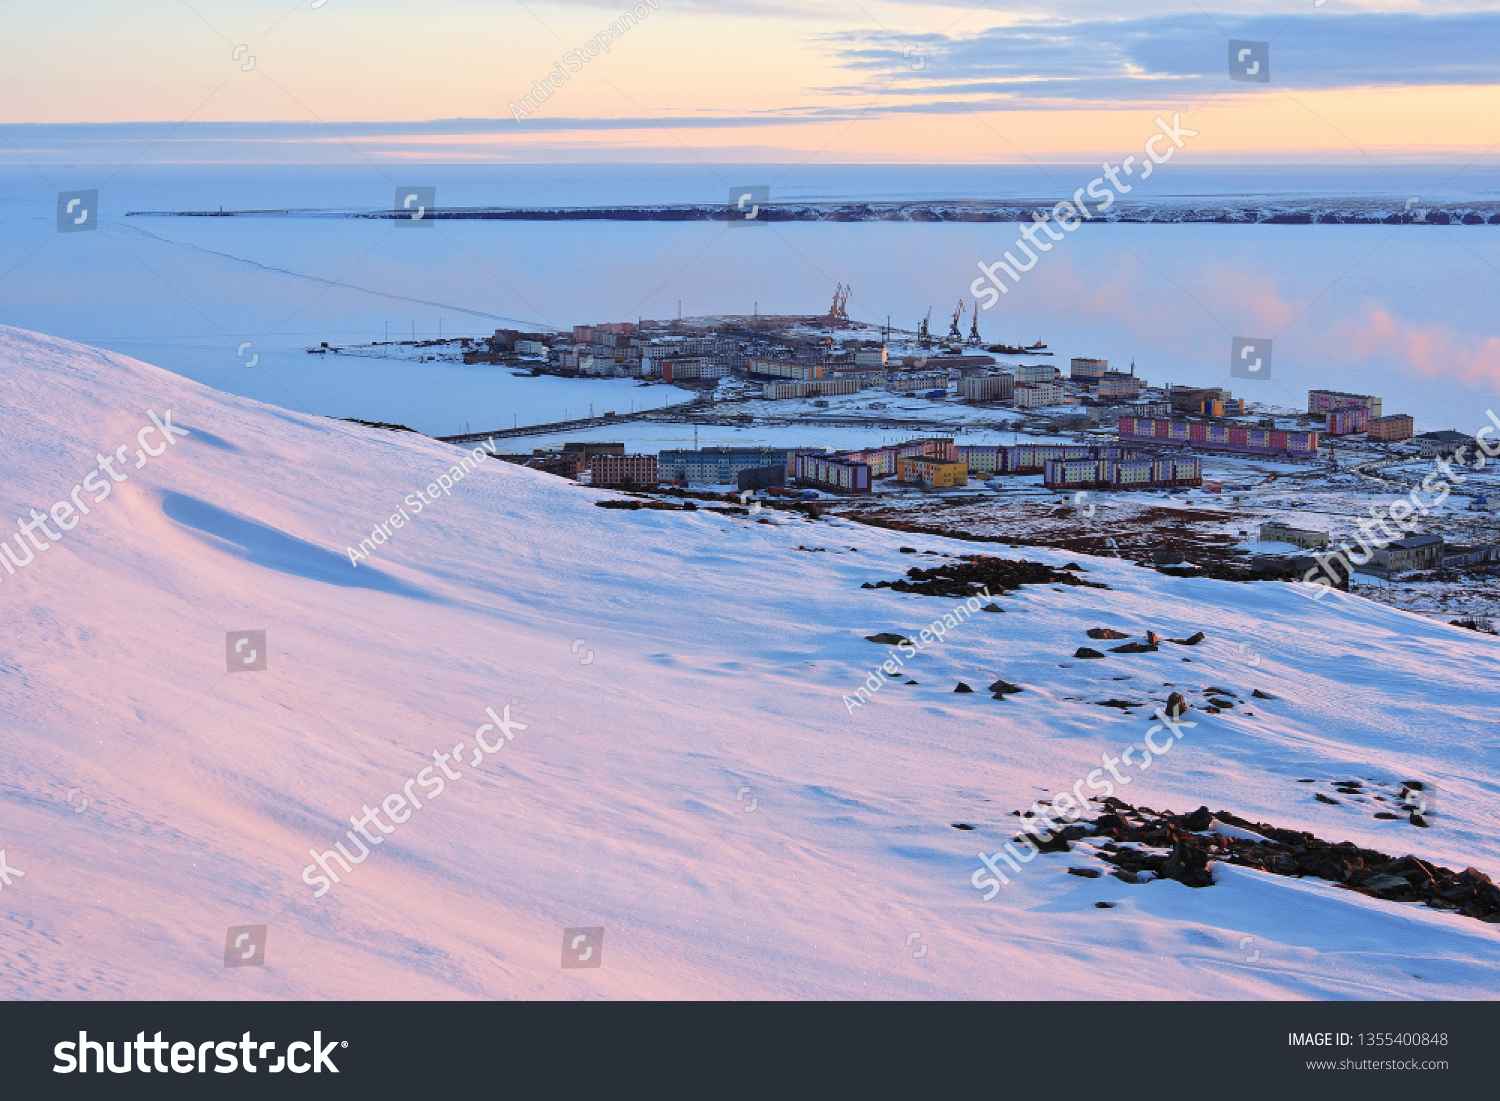 Arctic settlement. Pevek is the northernmost city in Russia. Cold snowy May in the Arctic in the north of Chukotka. Small polar town and the coast of the Arctic Ocean. Pevek, Chukotka, Siberia, Russia #1355400848